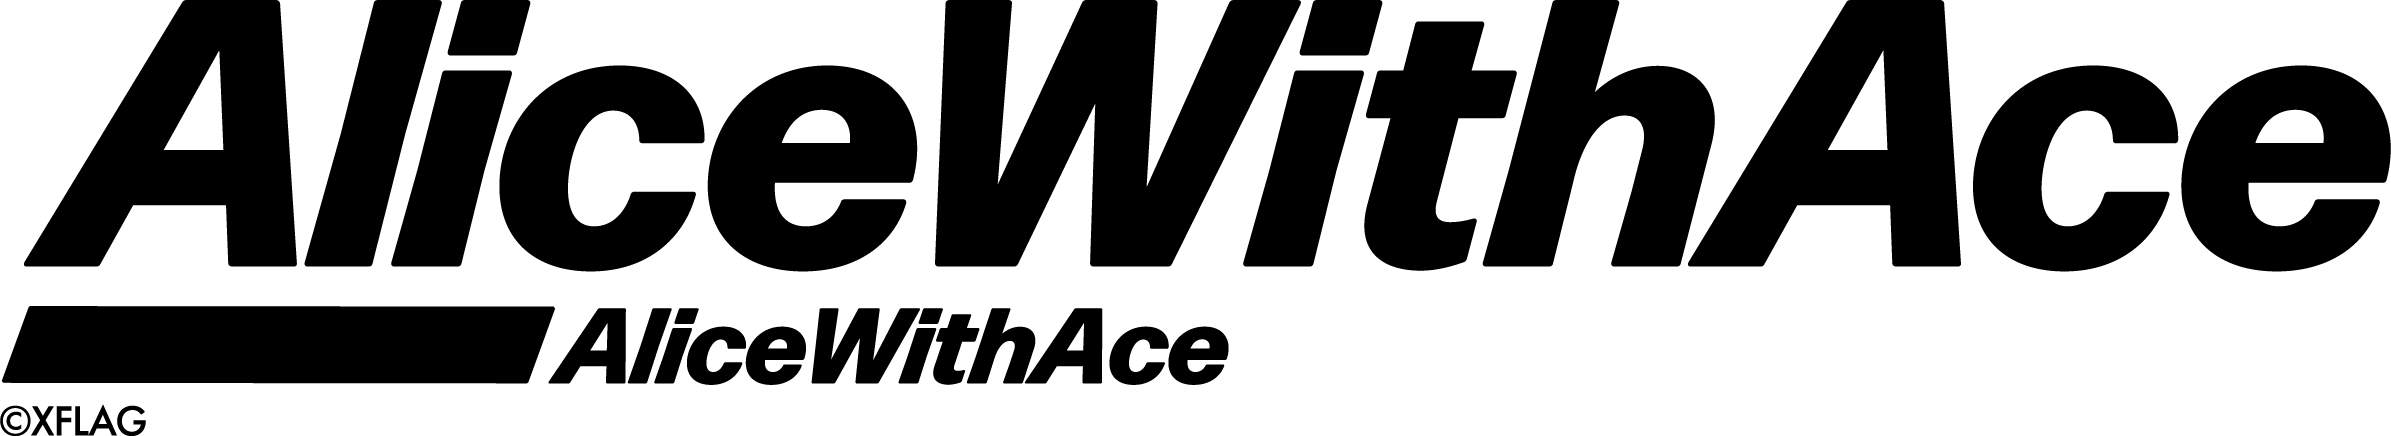 AliceWithAce